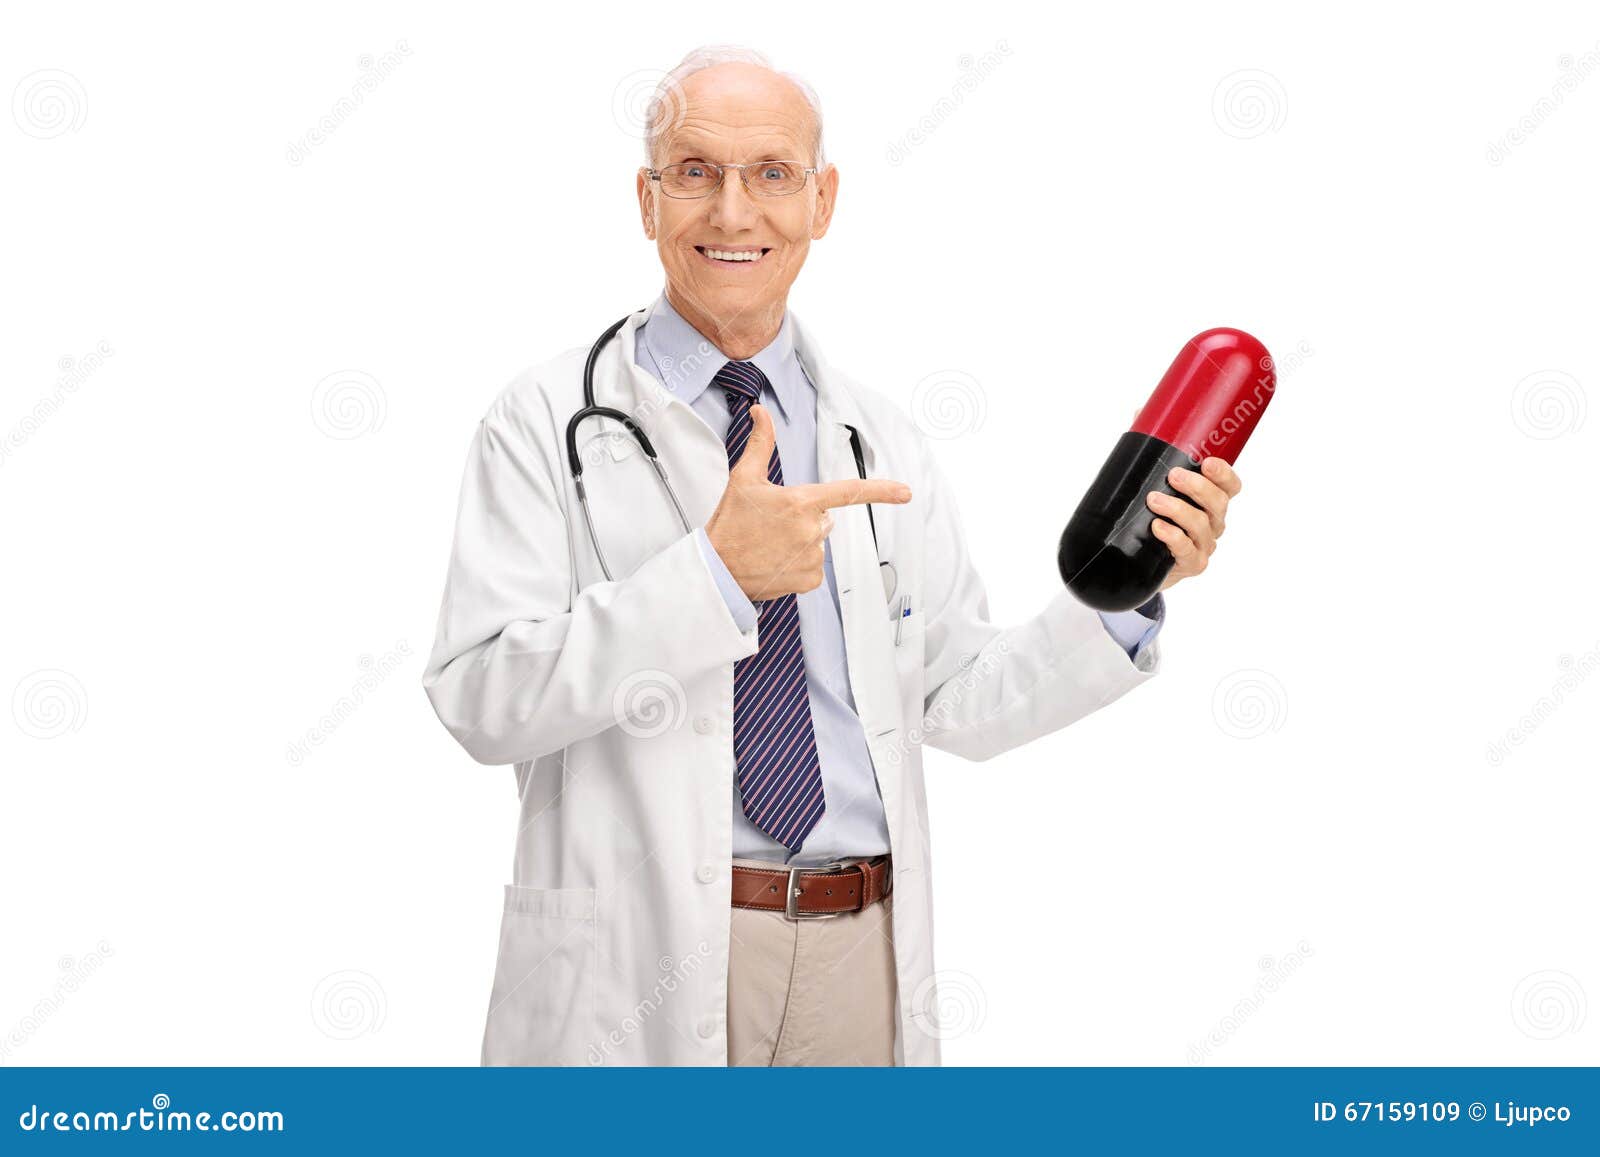 Mature Doctor Holding a Huge Pill Stock Image - Image of experienced ...